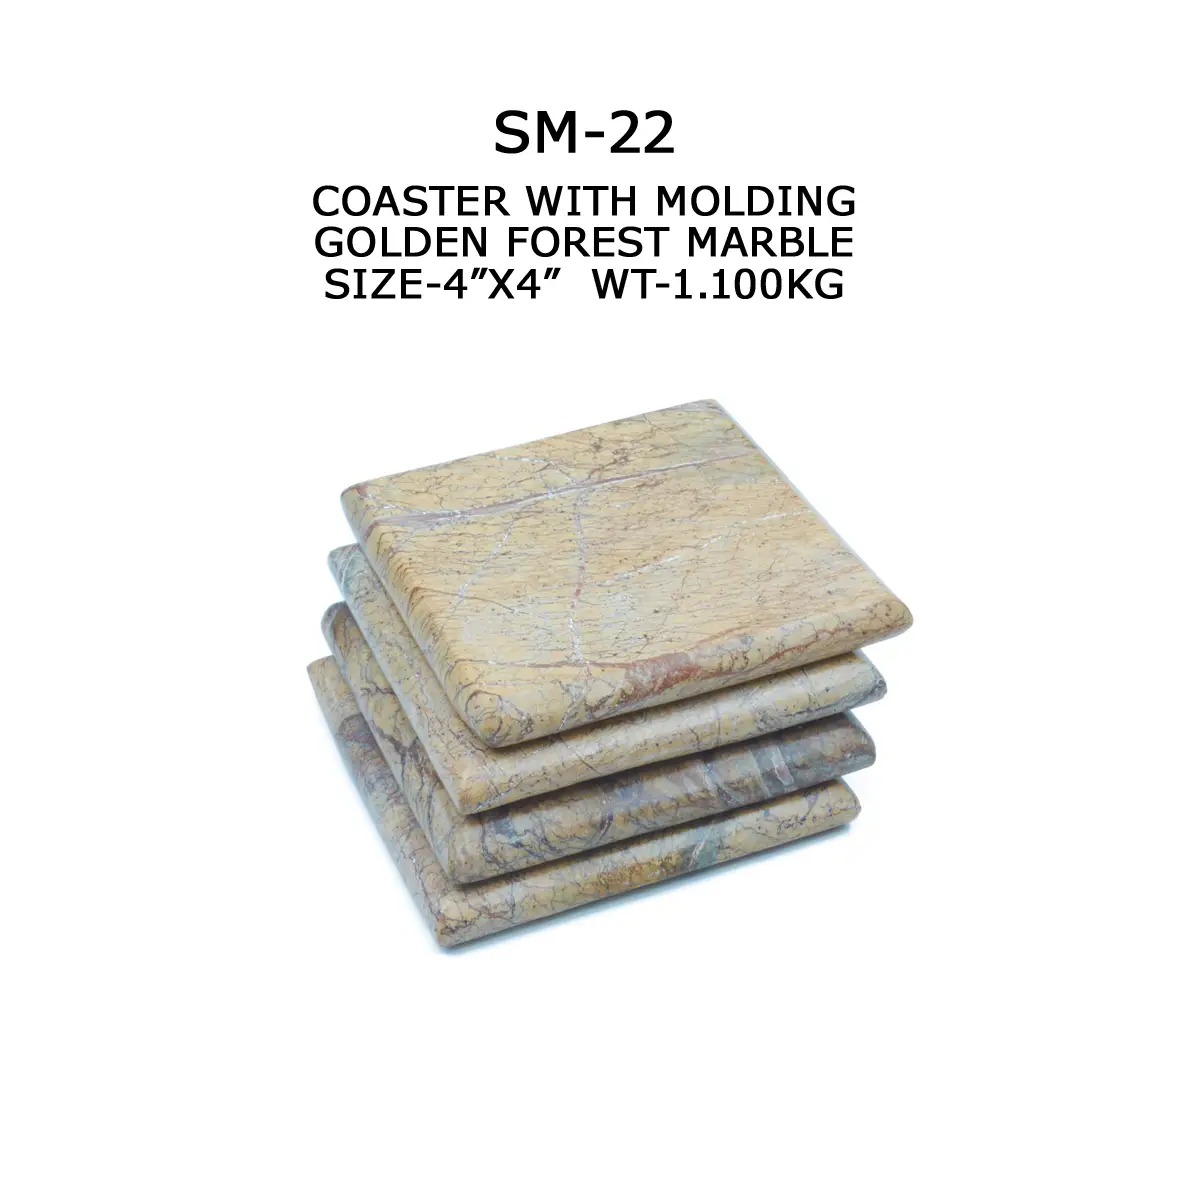 COASTER WITH MOLDING GOLDEN FOREST MARBLE